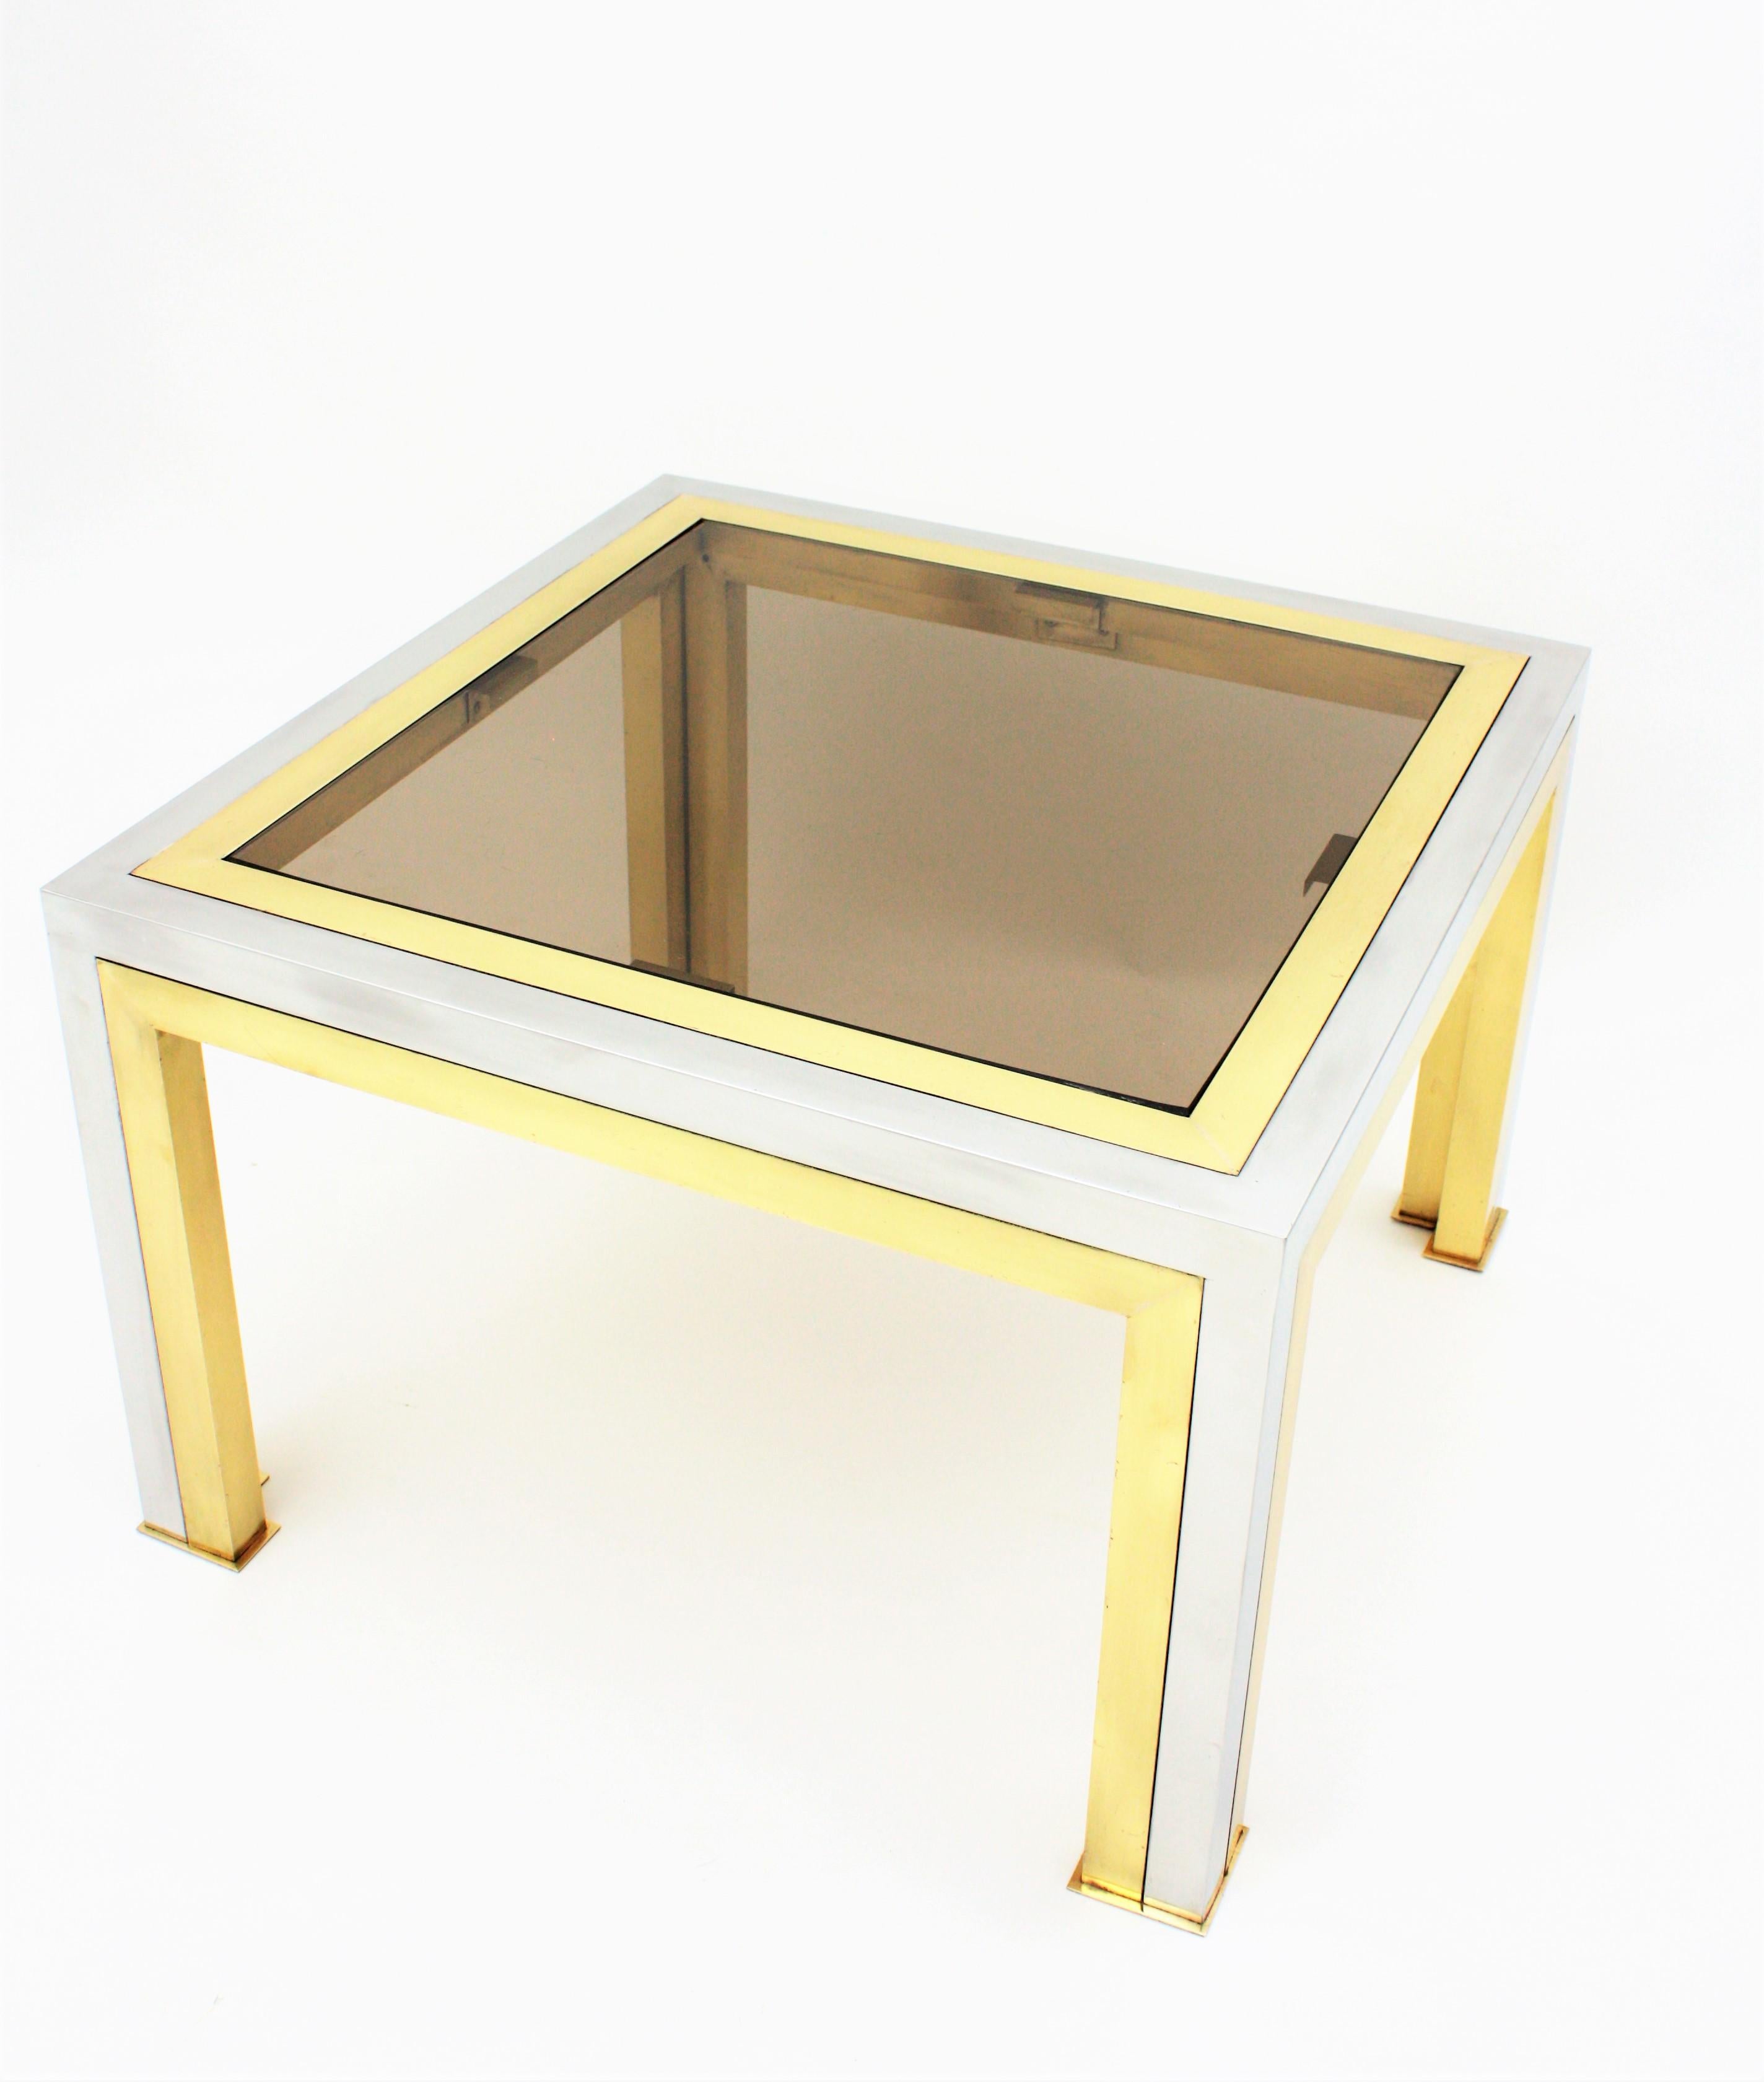 Romeo Rega Coffee Table in Brass, Chromed Steel and Glass 4